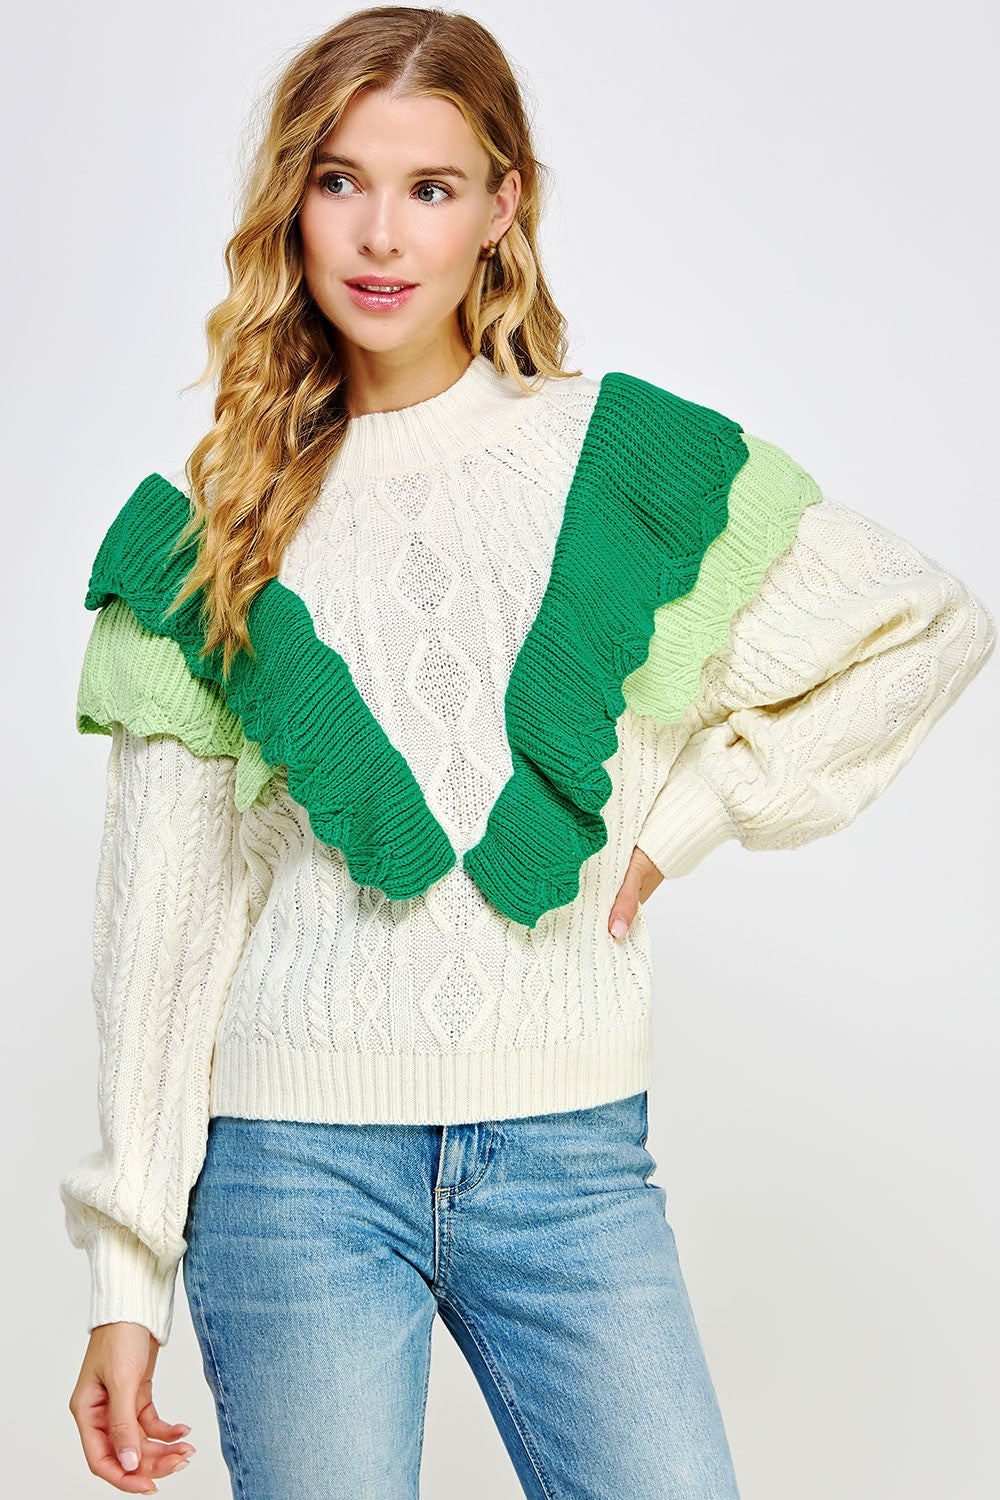 Off-White/Emerald/Air Contrast Ruffled Accent Cable Knit Sweater